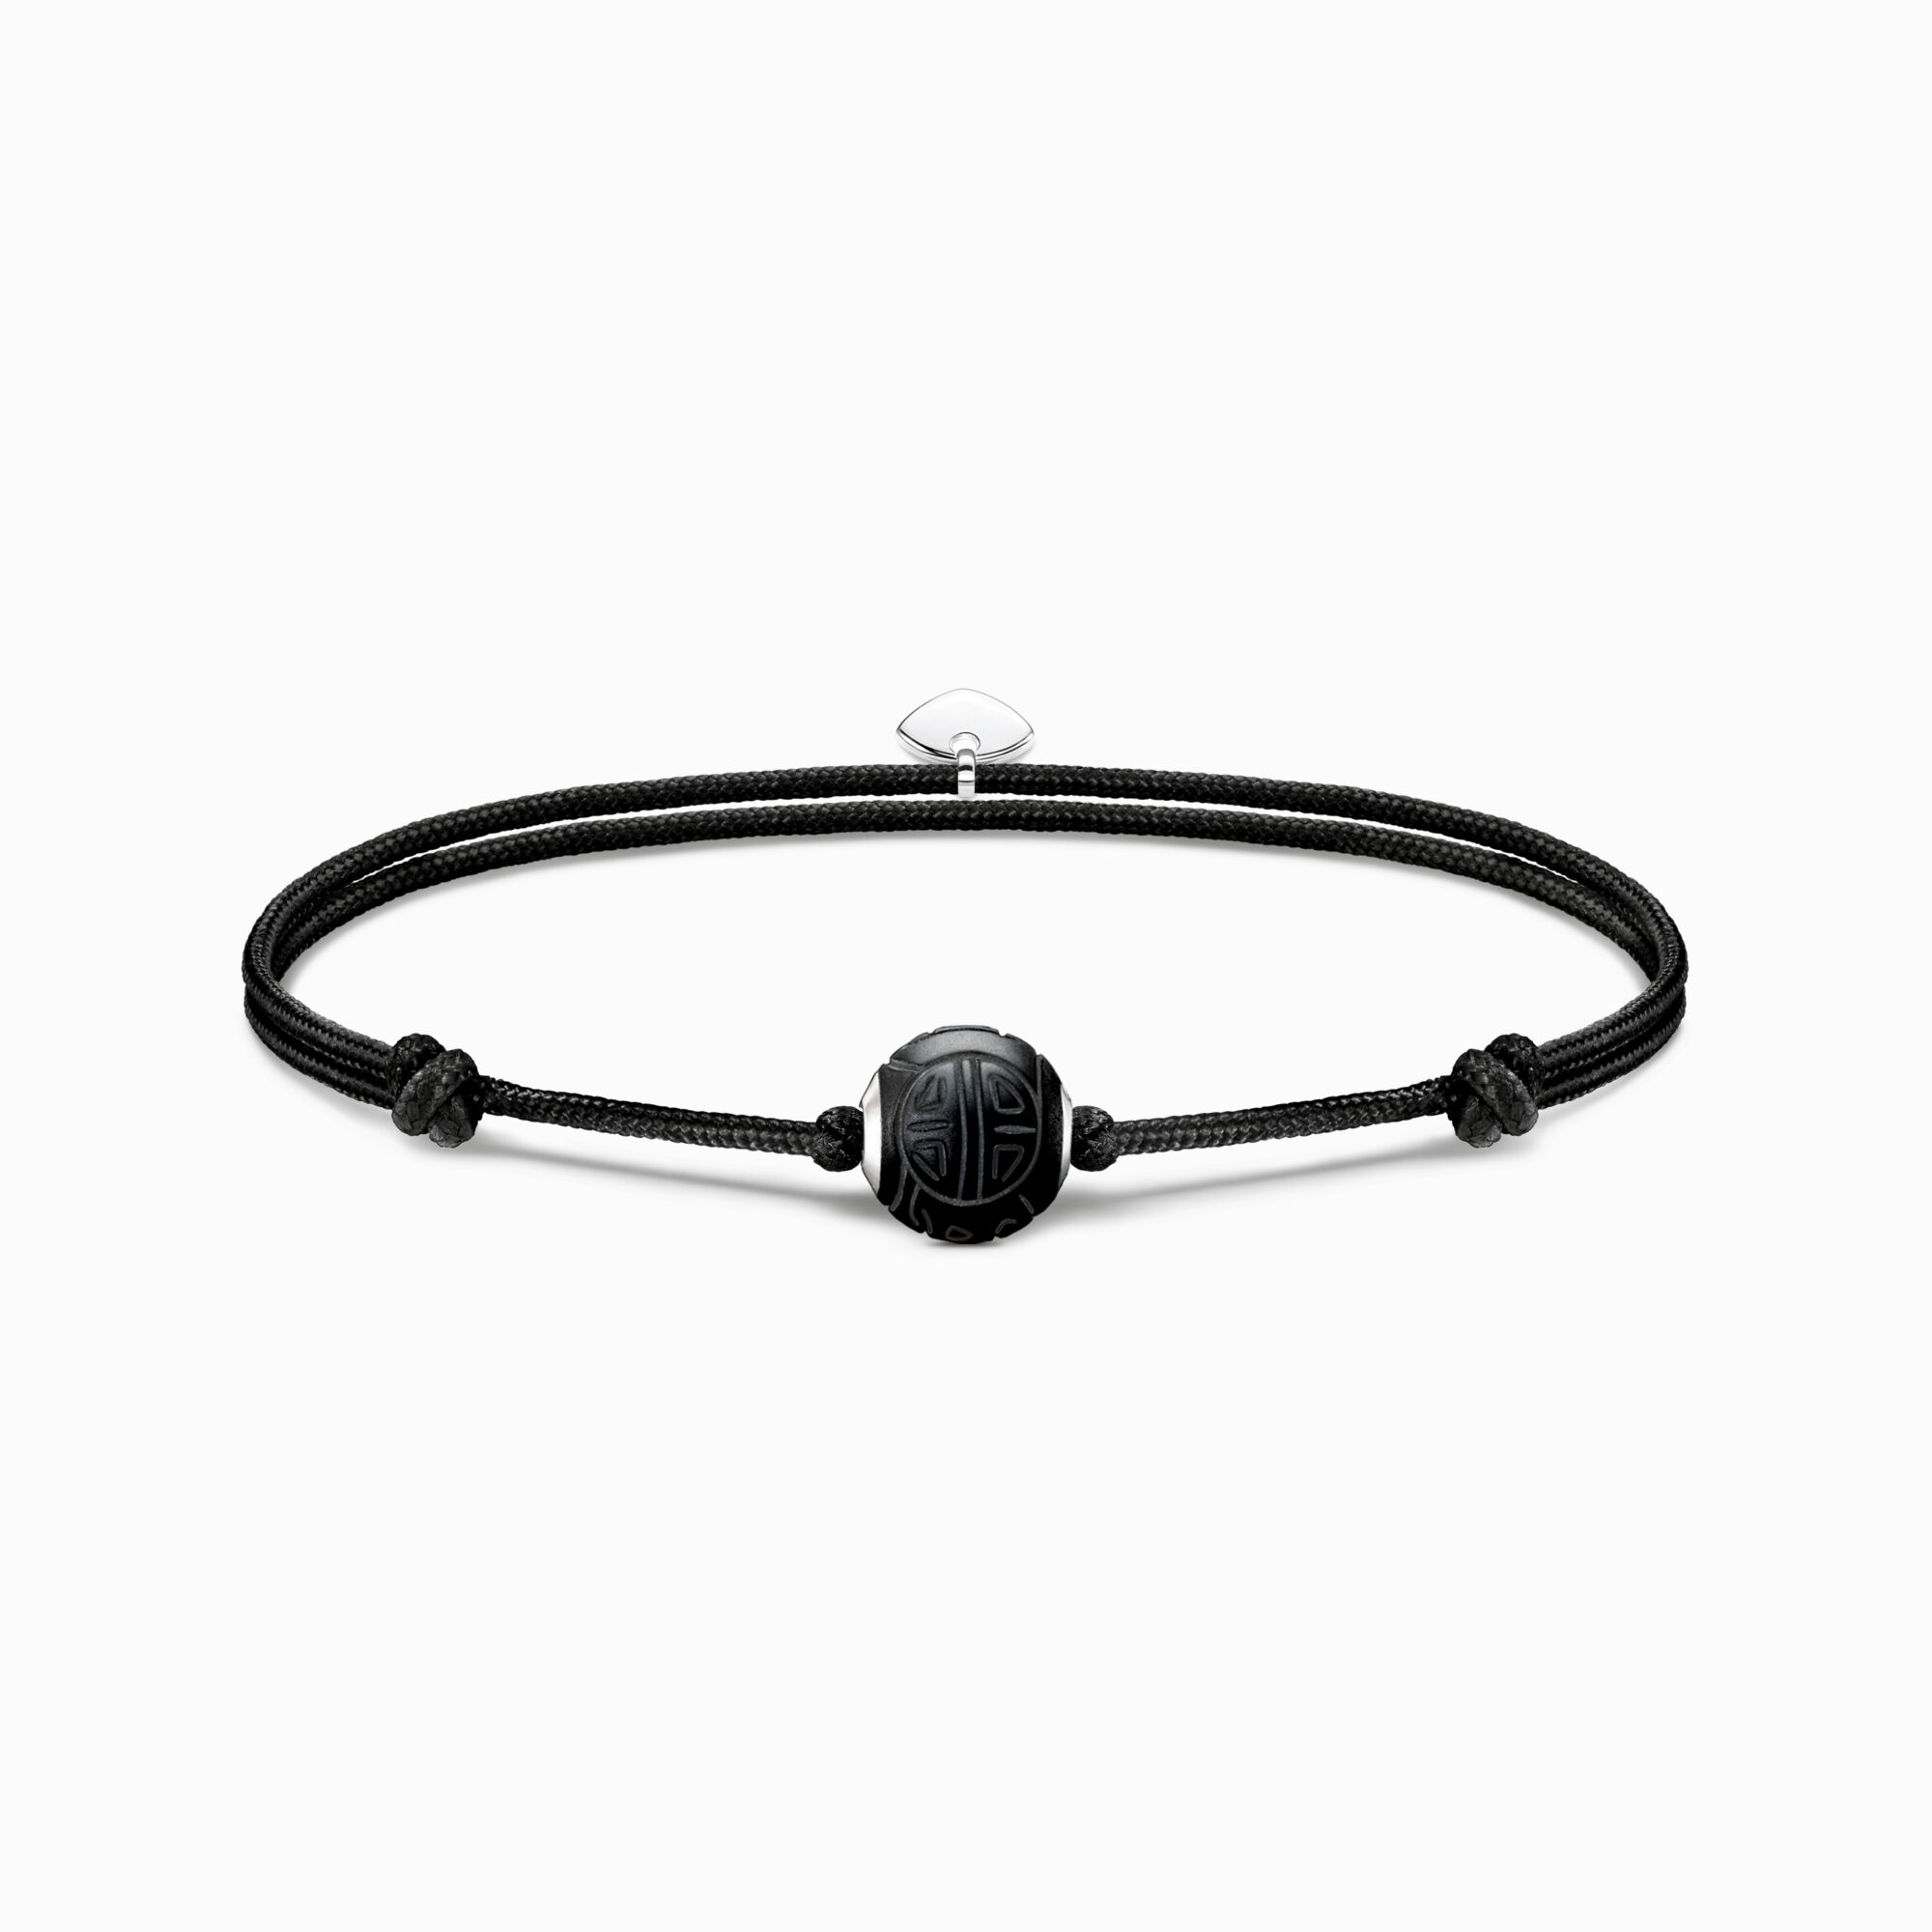 Bracelet Karma Secret with black obsidian Bead matt from the Karma Beads collection in the THOMAS SABO online store